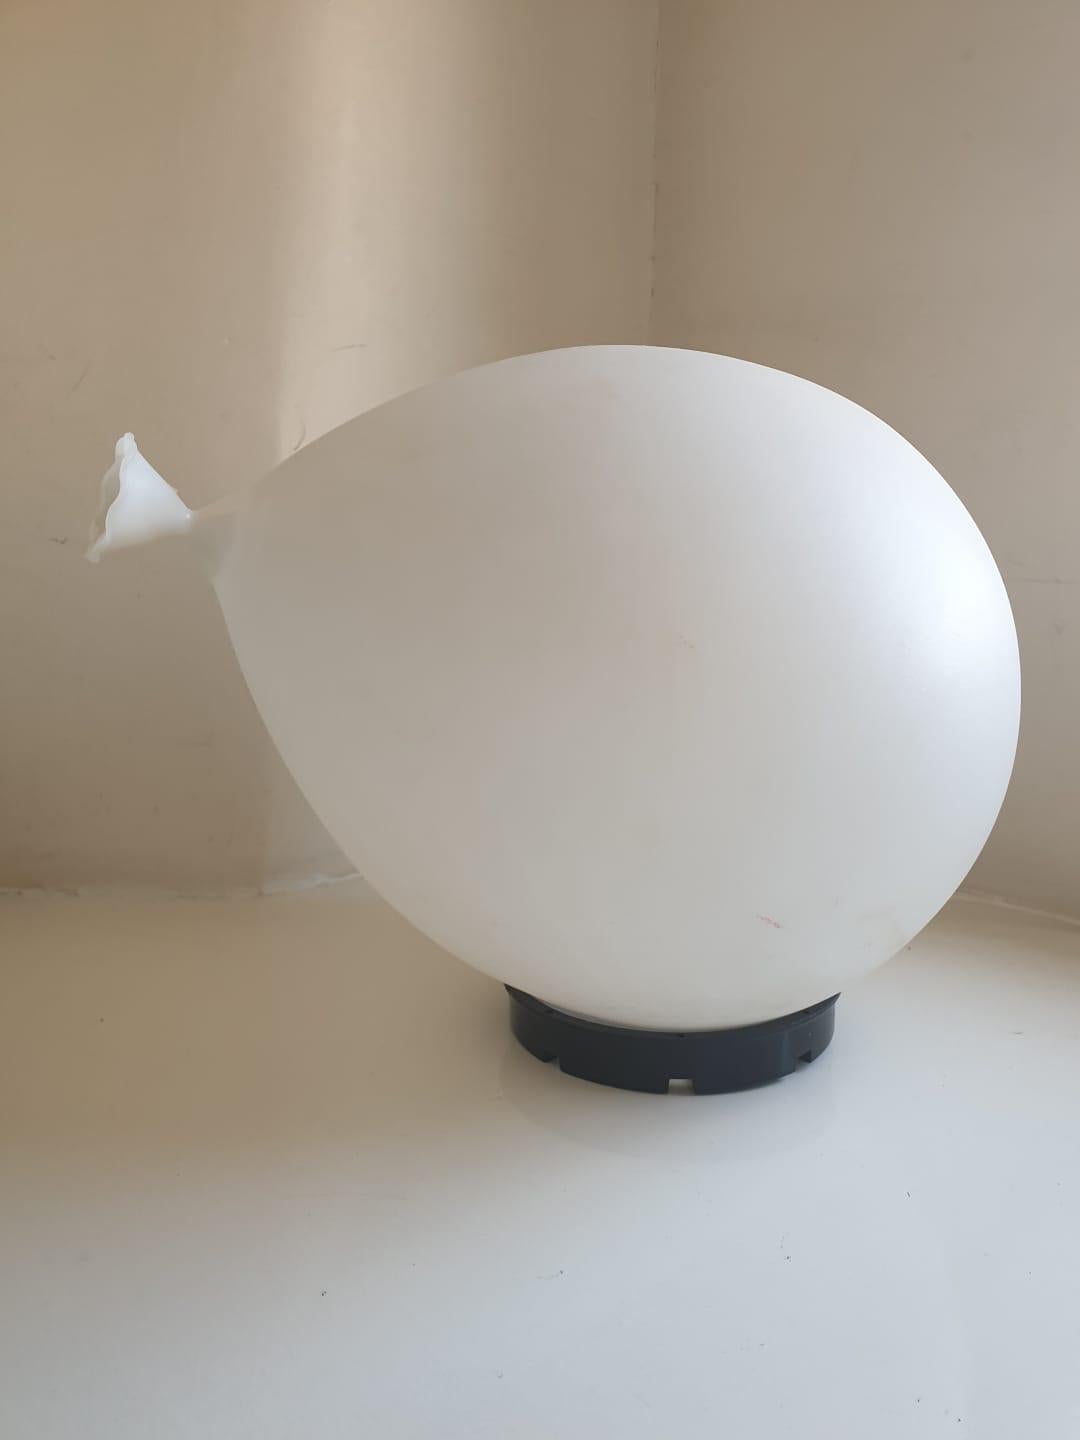 Iconic lamp which can be used as wall, ceiling or table light. When placed on the wall or ceiling it looks like a real floating gas balloon.

Lamp is made of white plastic on a black plastic base. Cord with marble is missing. Lamp is original and